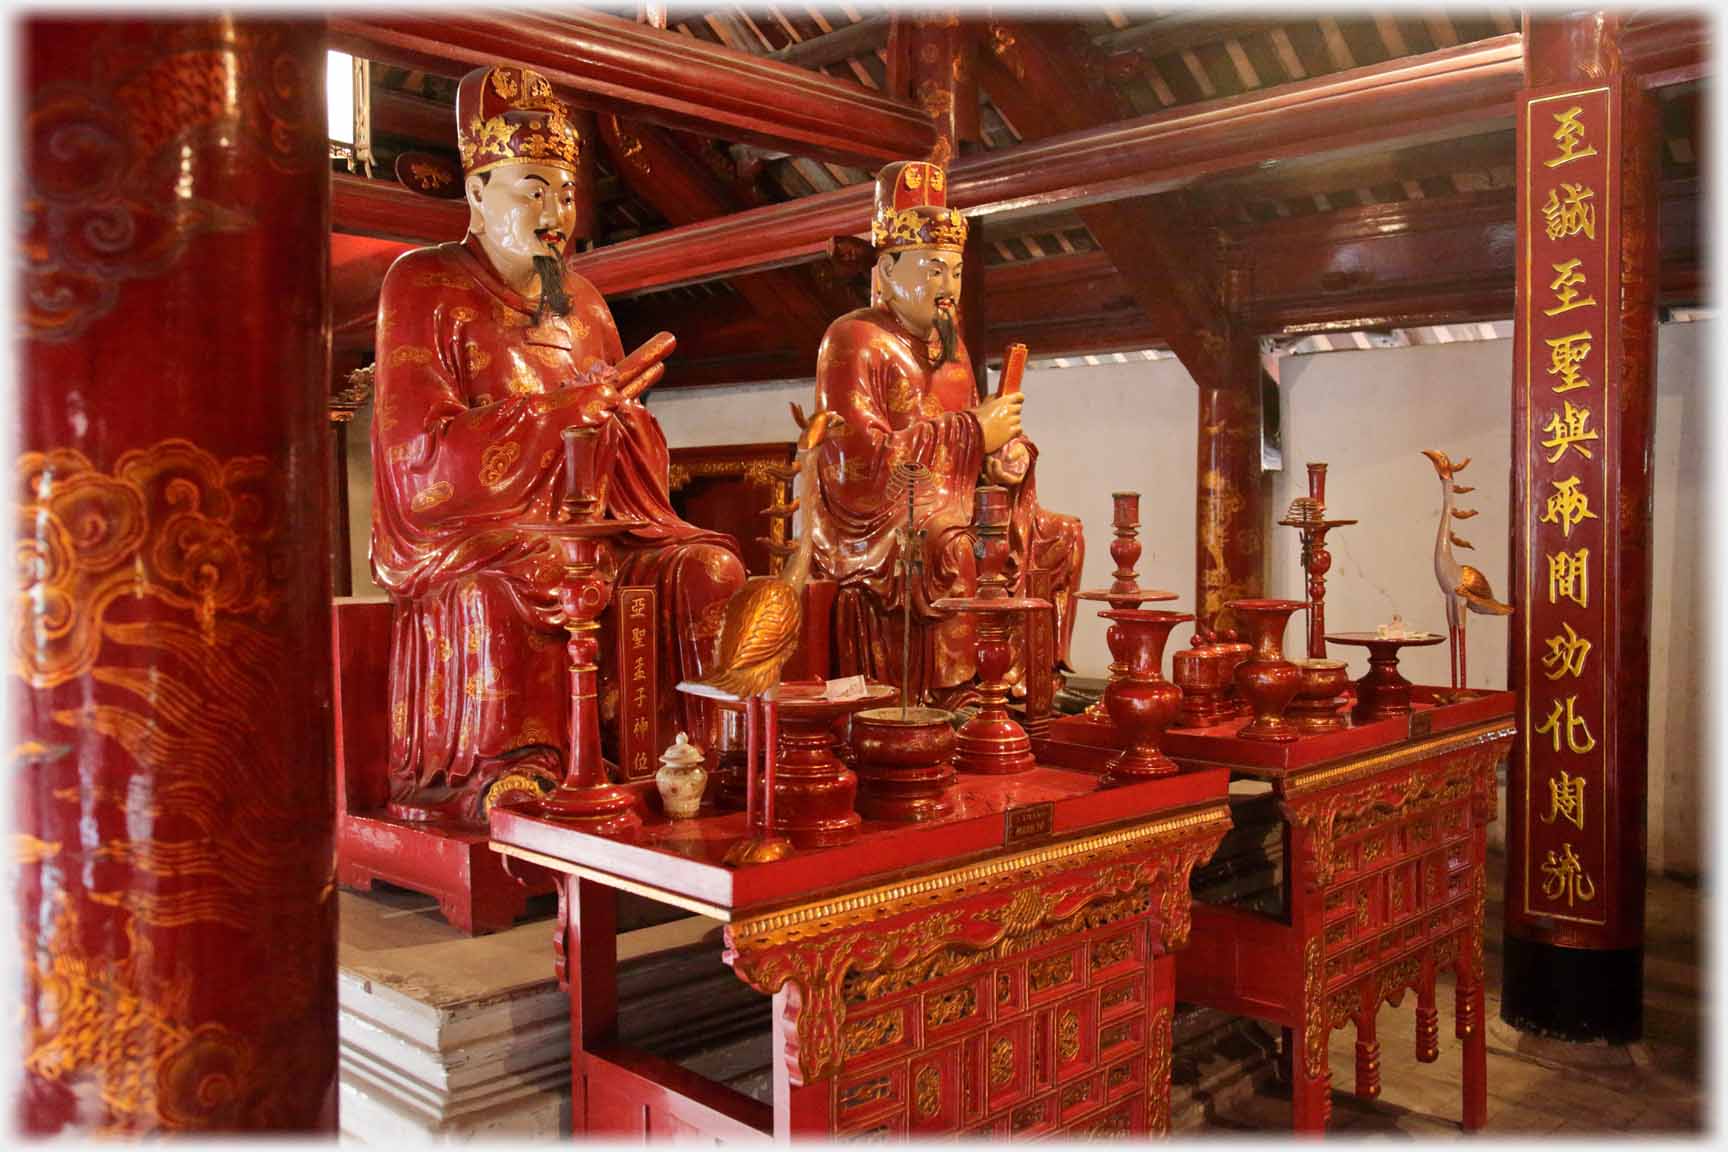 Two red and gold seated figures looking to the right.